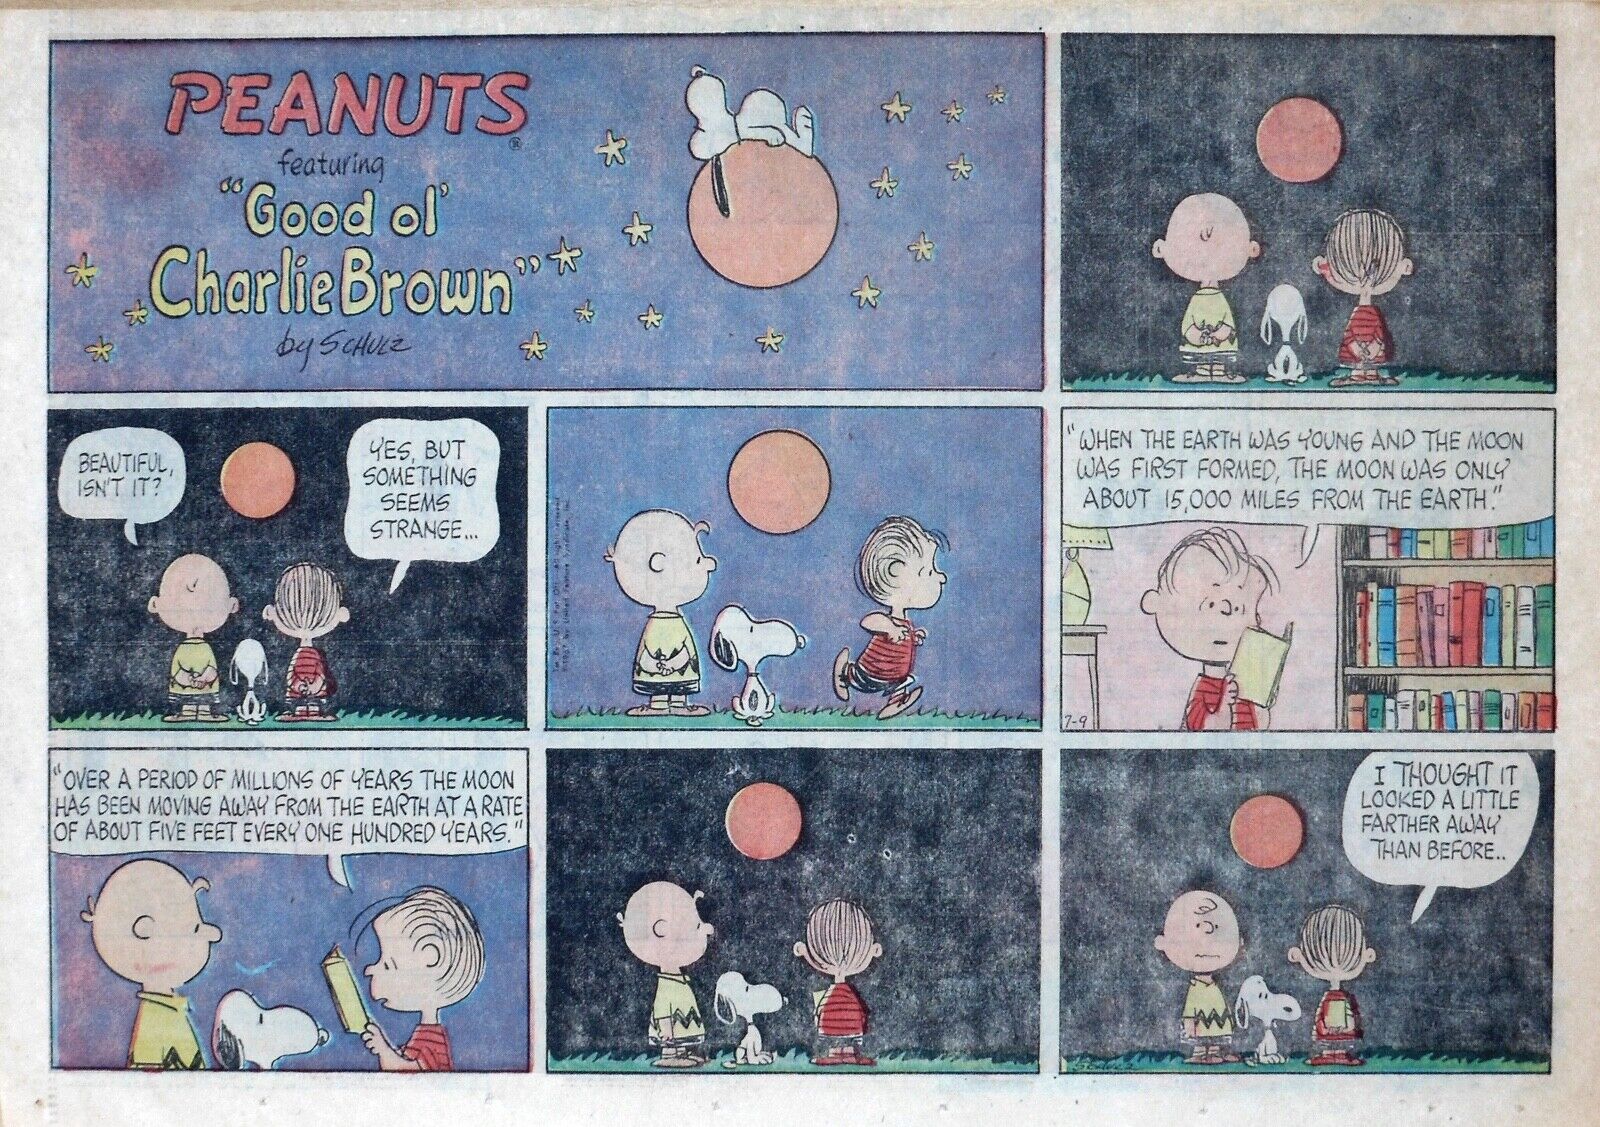 Peanuts by Charles Schulz - large half-page color Sunday comic - July 9, 1967